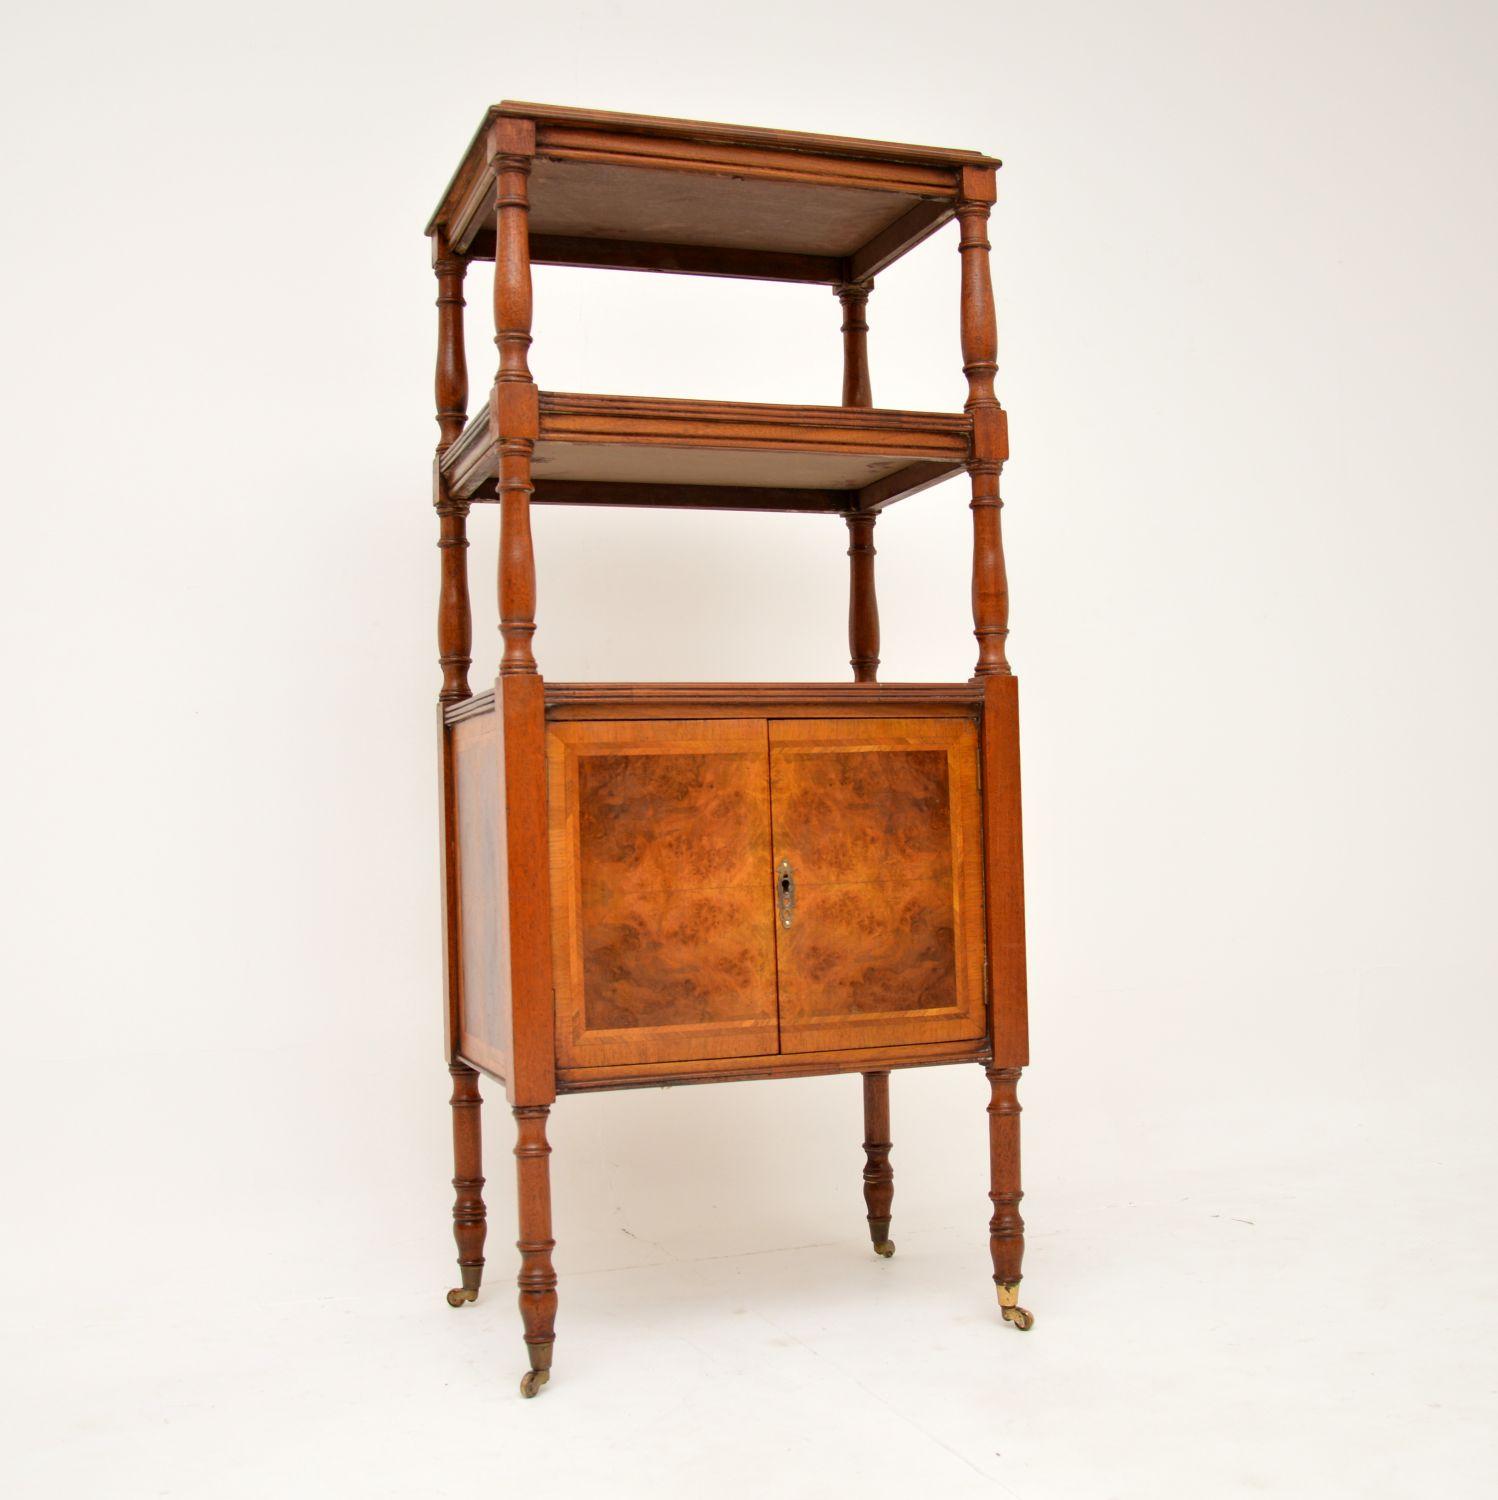 A stunning and useful antique three tier etagere in walnut, with a cabinet below. This was made in England, it dates from around the 1930’s.

The quality is outstanding, with such a high level of craftsmanship on display. The burr walnut grain